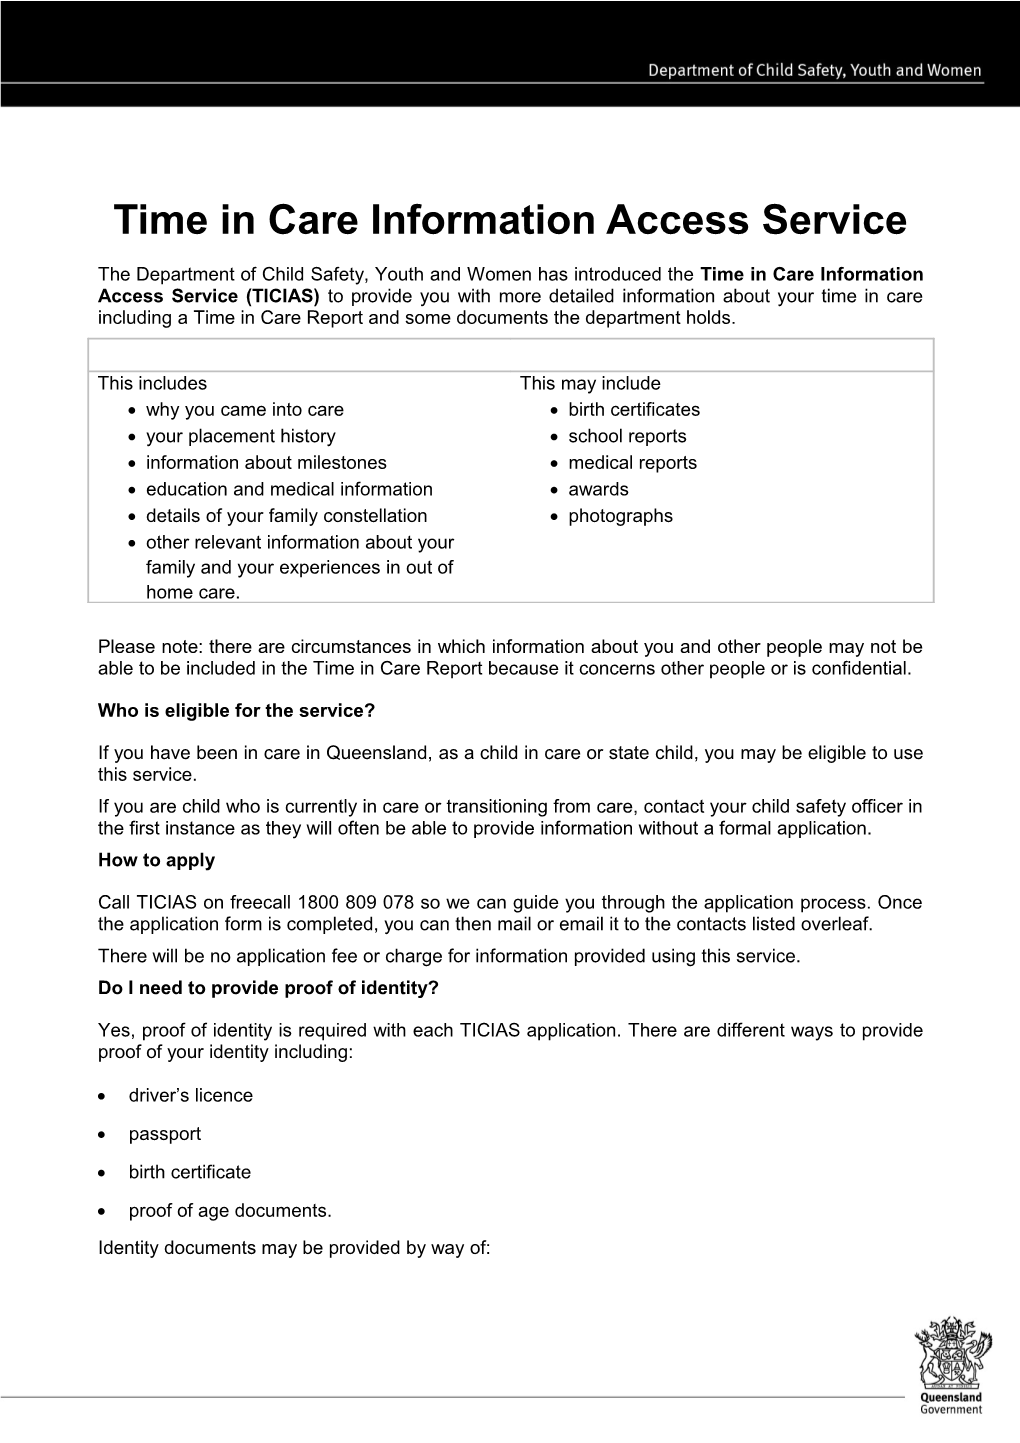 Time in Care Information Access Service Information Sheet